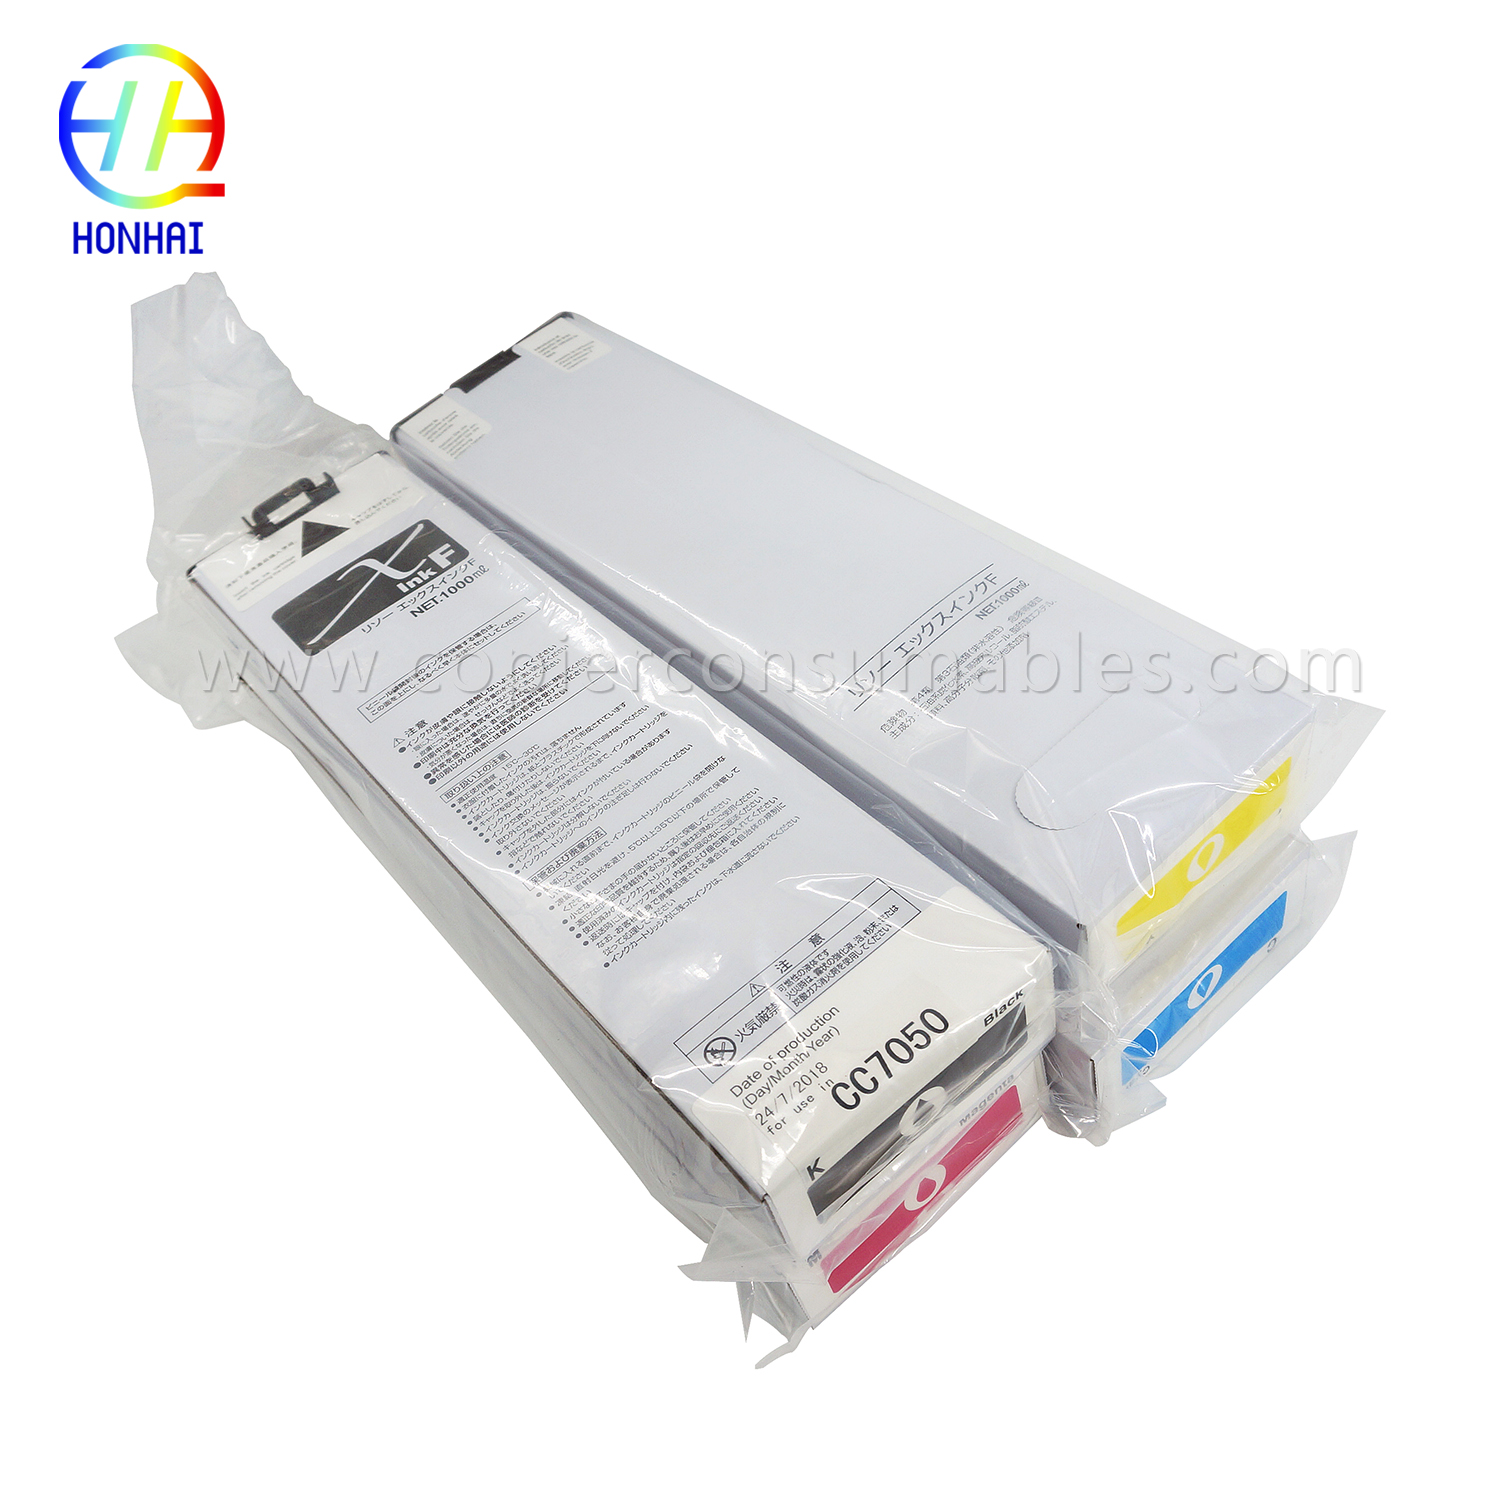 Inkpatroon Risograph ComColor 3010 3050 3150 7010 7050 7150 9050 9150 HC 5000 5500 (S-6300G S-6301G S-6302G S-6303G) (8)